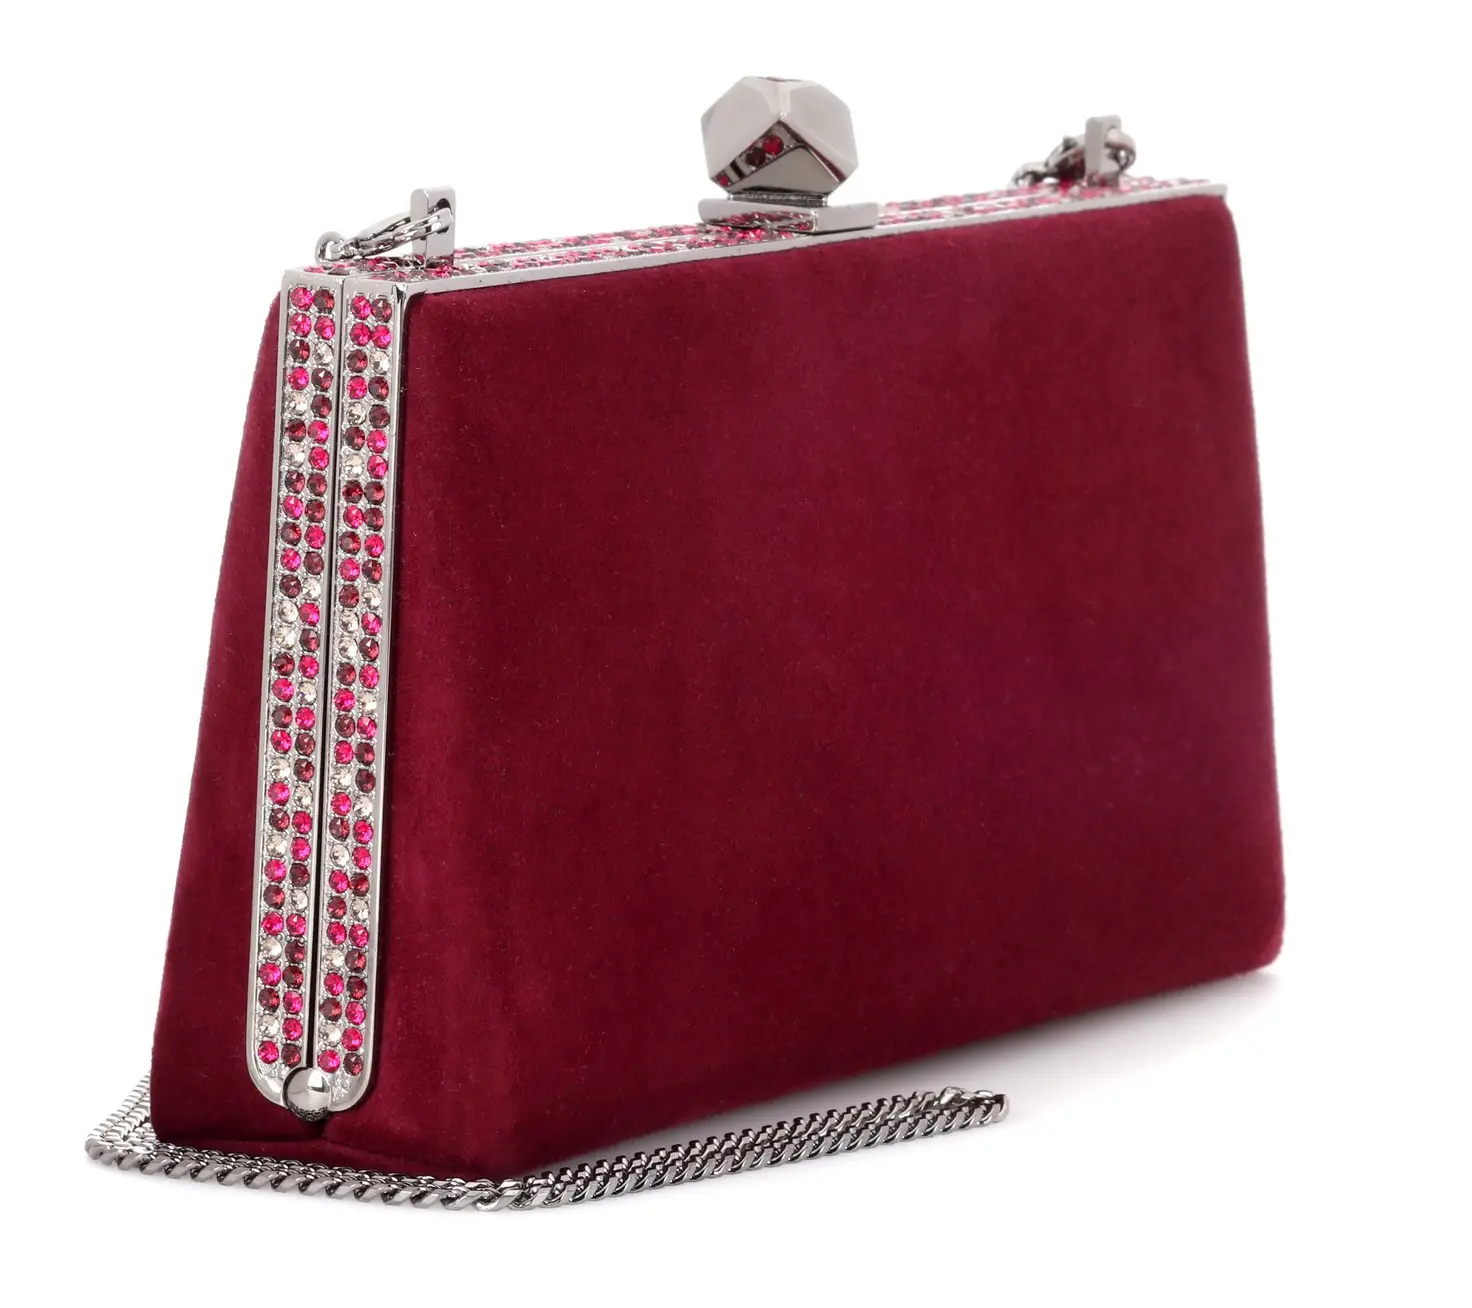 The Duchess of Cambridge carried Jimmy Choo Celeste crystal-embellished suede clutch